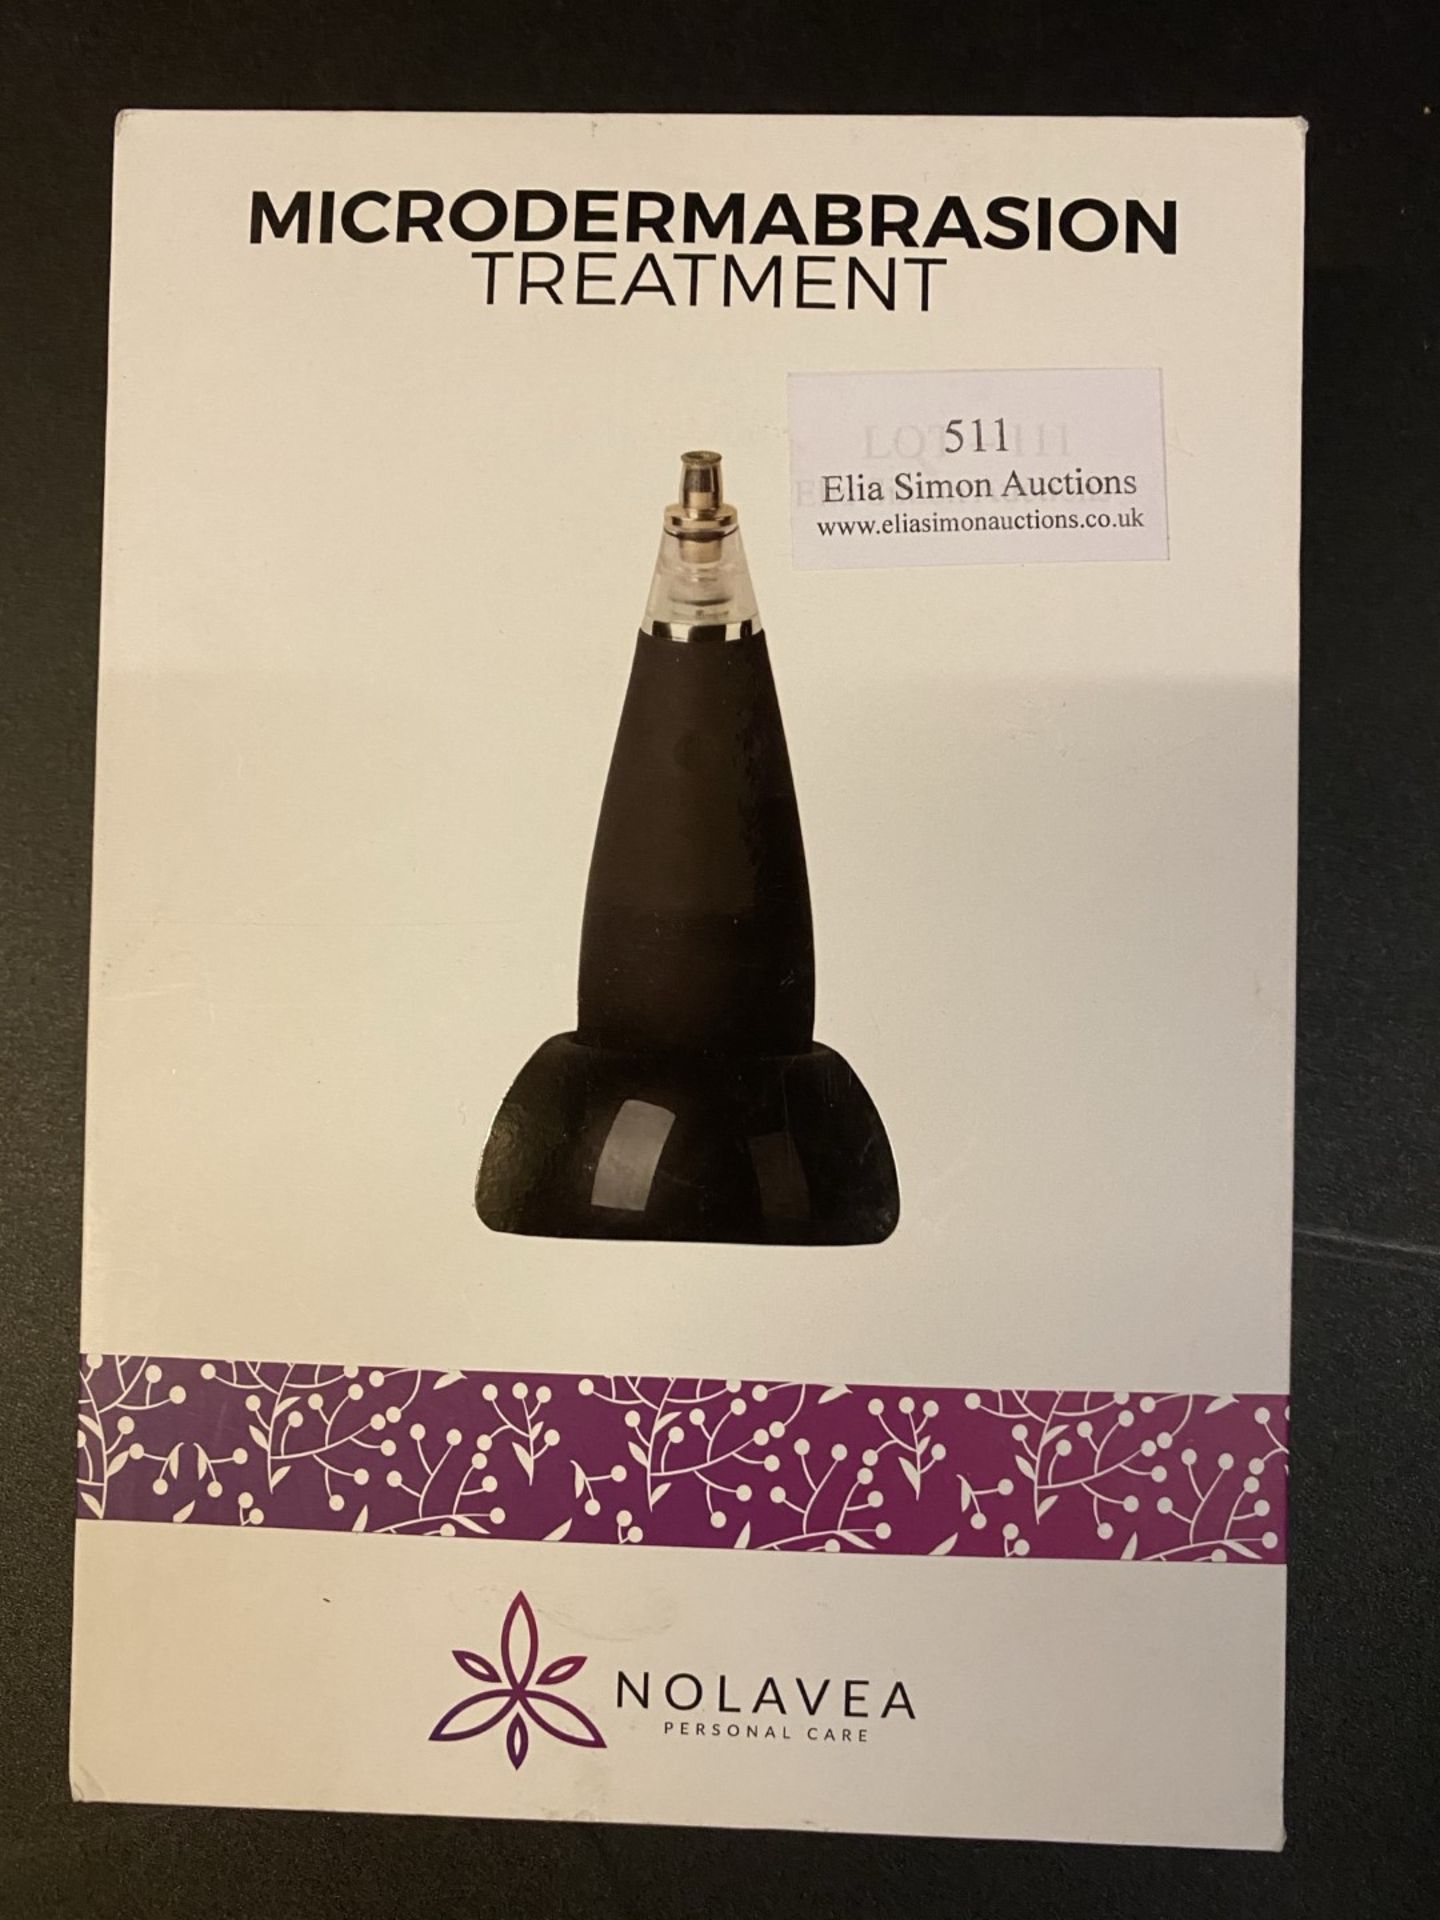 Blackhead Remover Vacuum - Microdermabrasion Machine - 2 Suction Levels, 4 Tips, 2 Microcristalline - Image 2 of 2